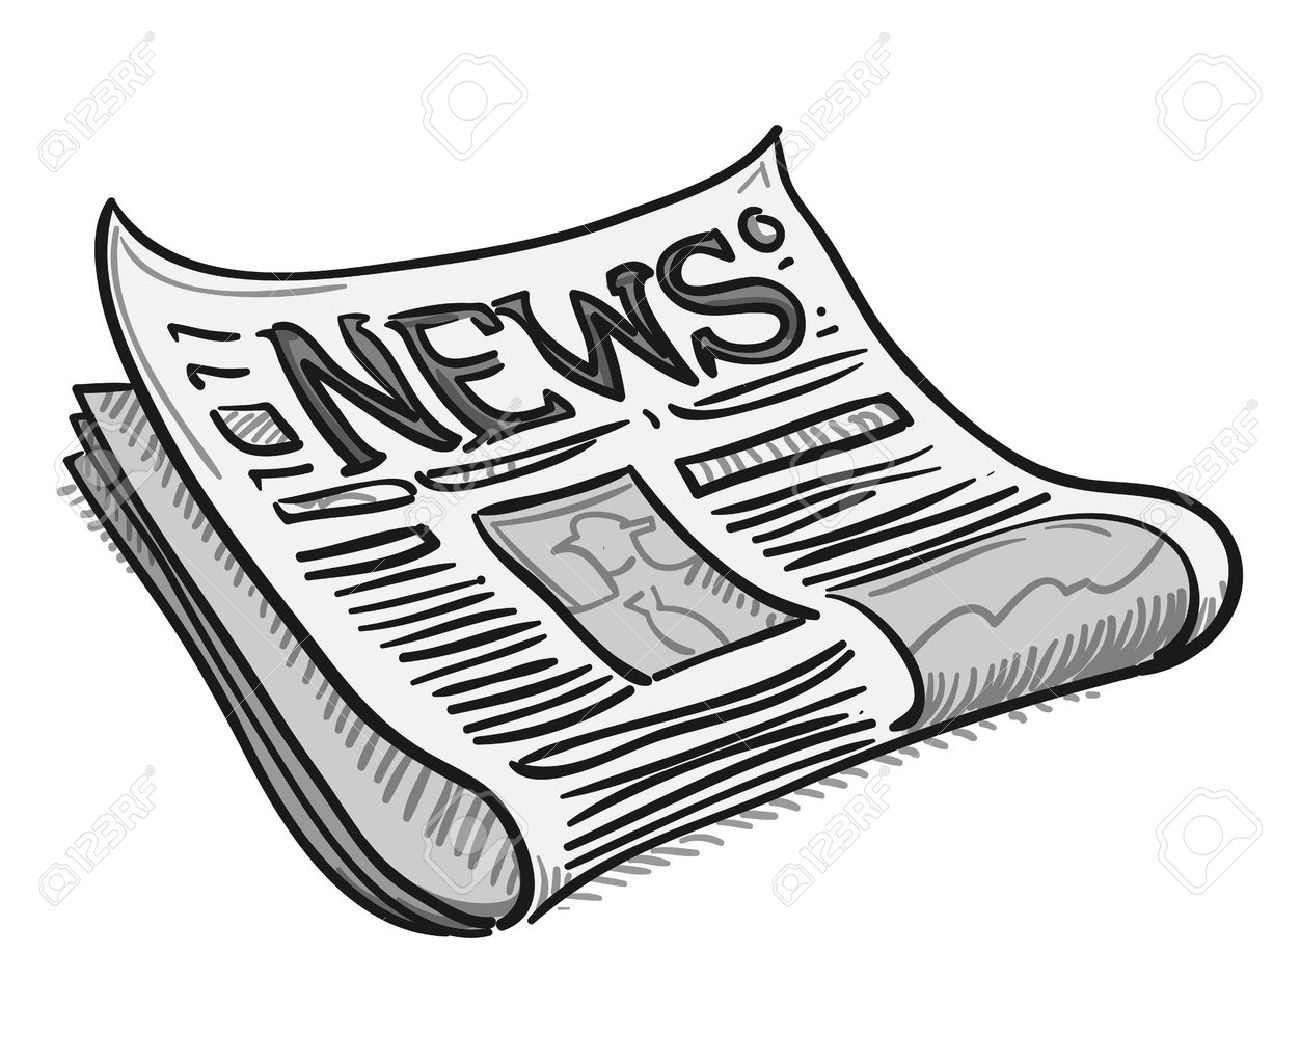 Newspaper front page clipart